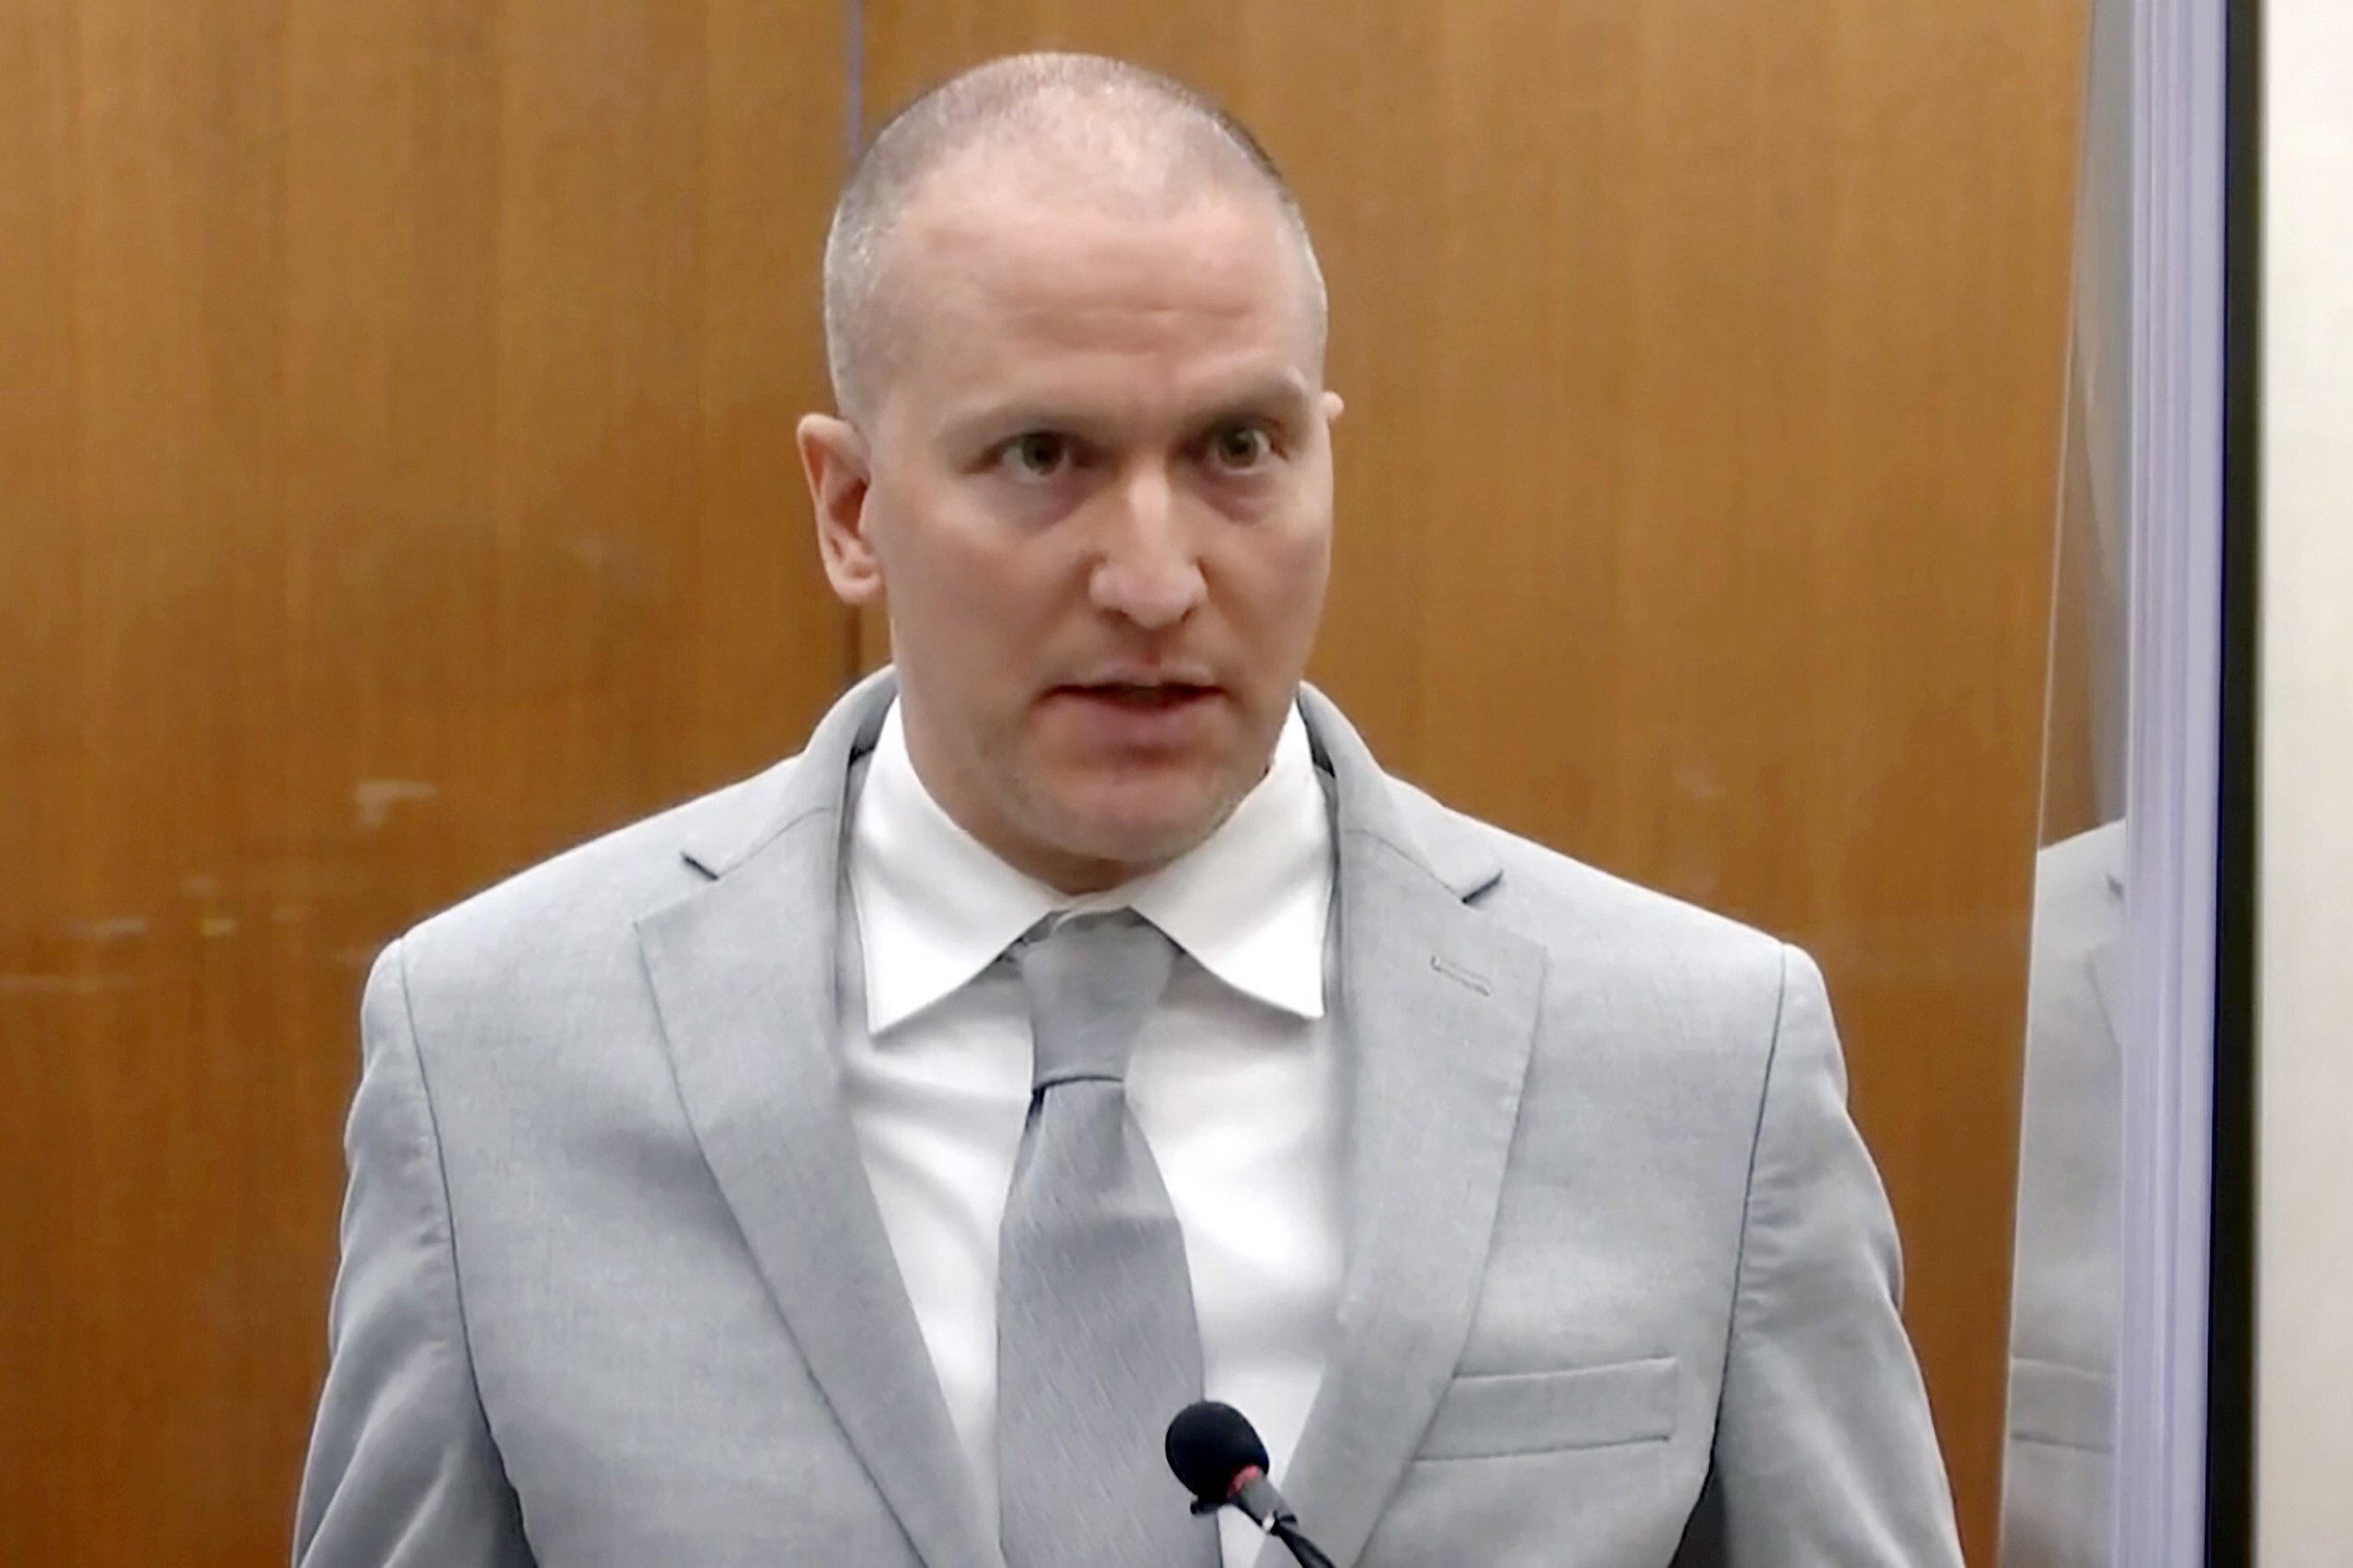 Former Minneapolis police Officer Derek Chauvin addresses the court as Hennepin County Judge Peter Cahill presides over sentencing at the Hennepin County Courthouse in Minneapolis in June. Photo: Court TV via AP